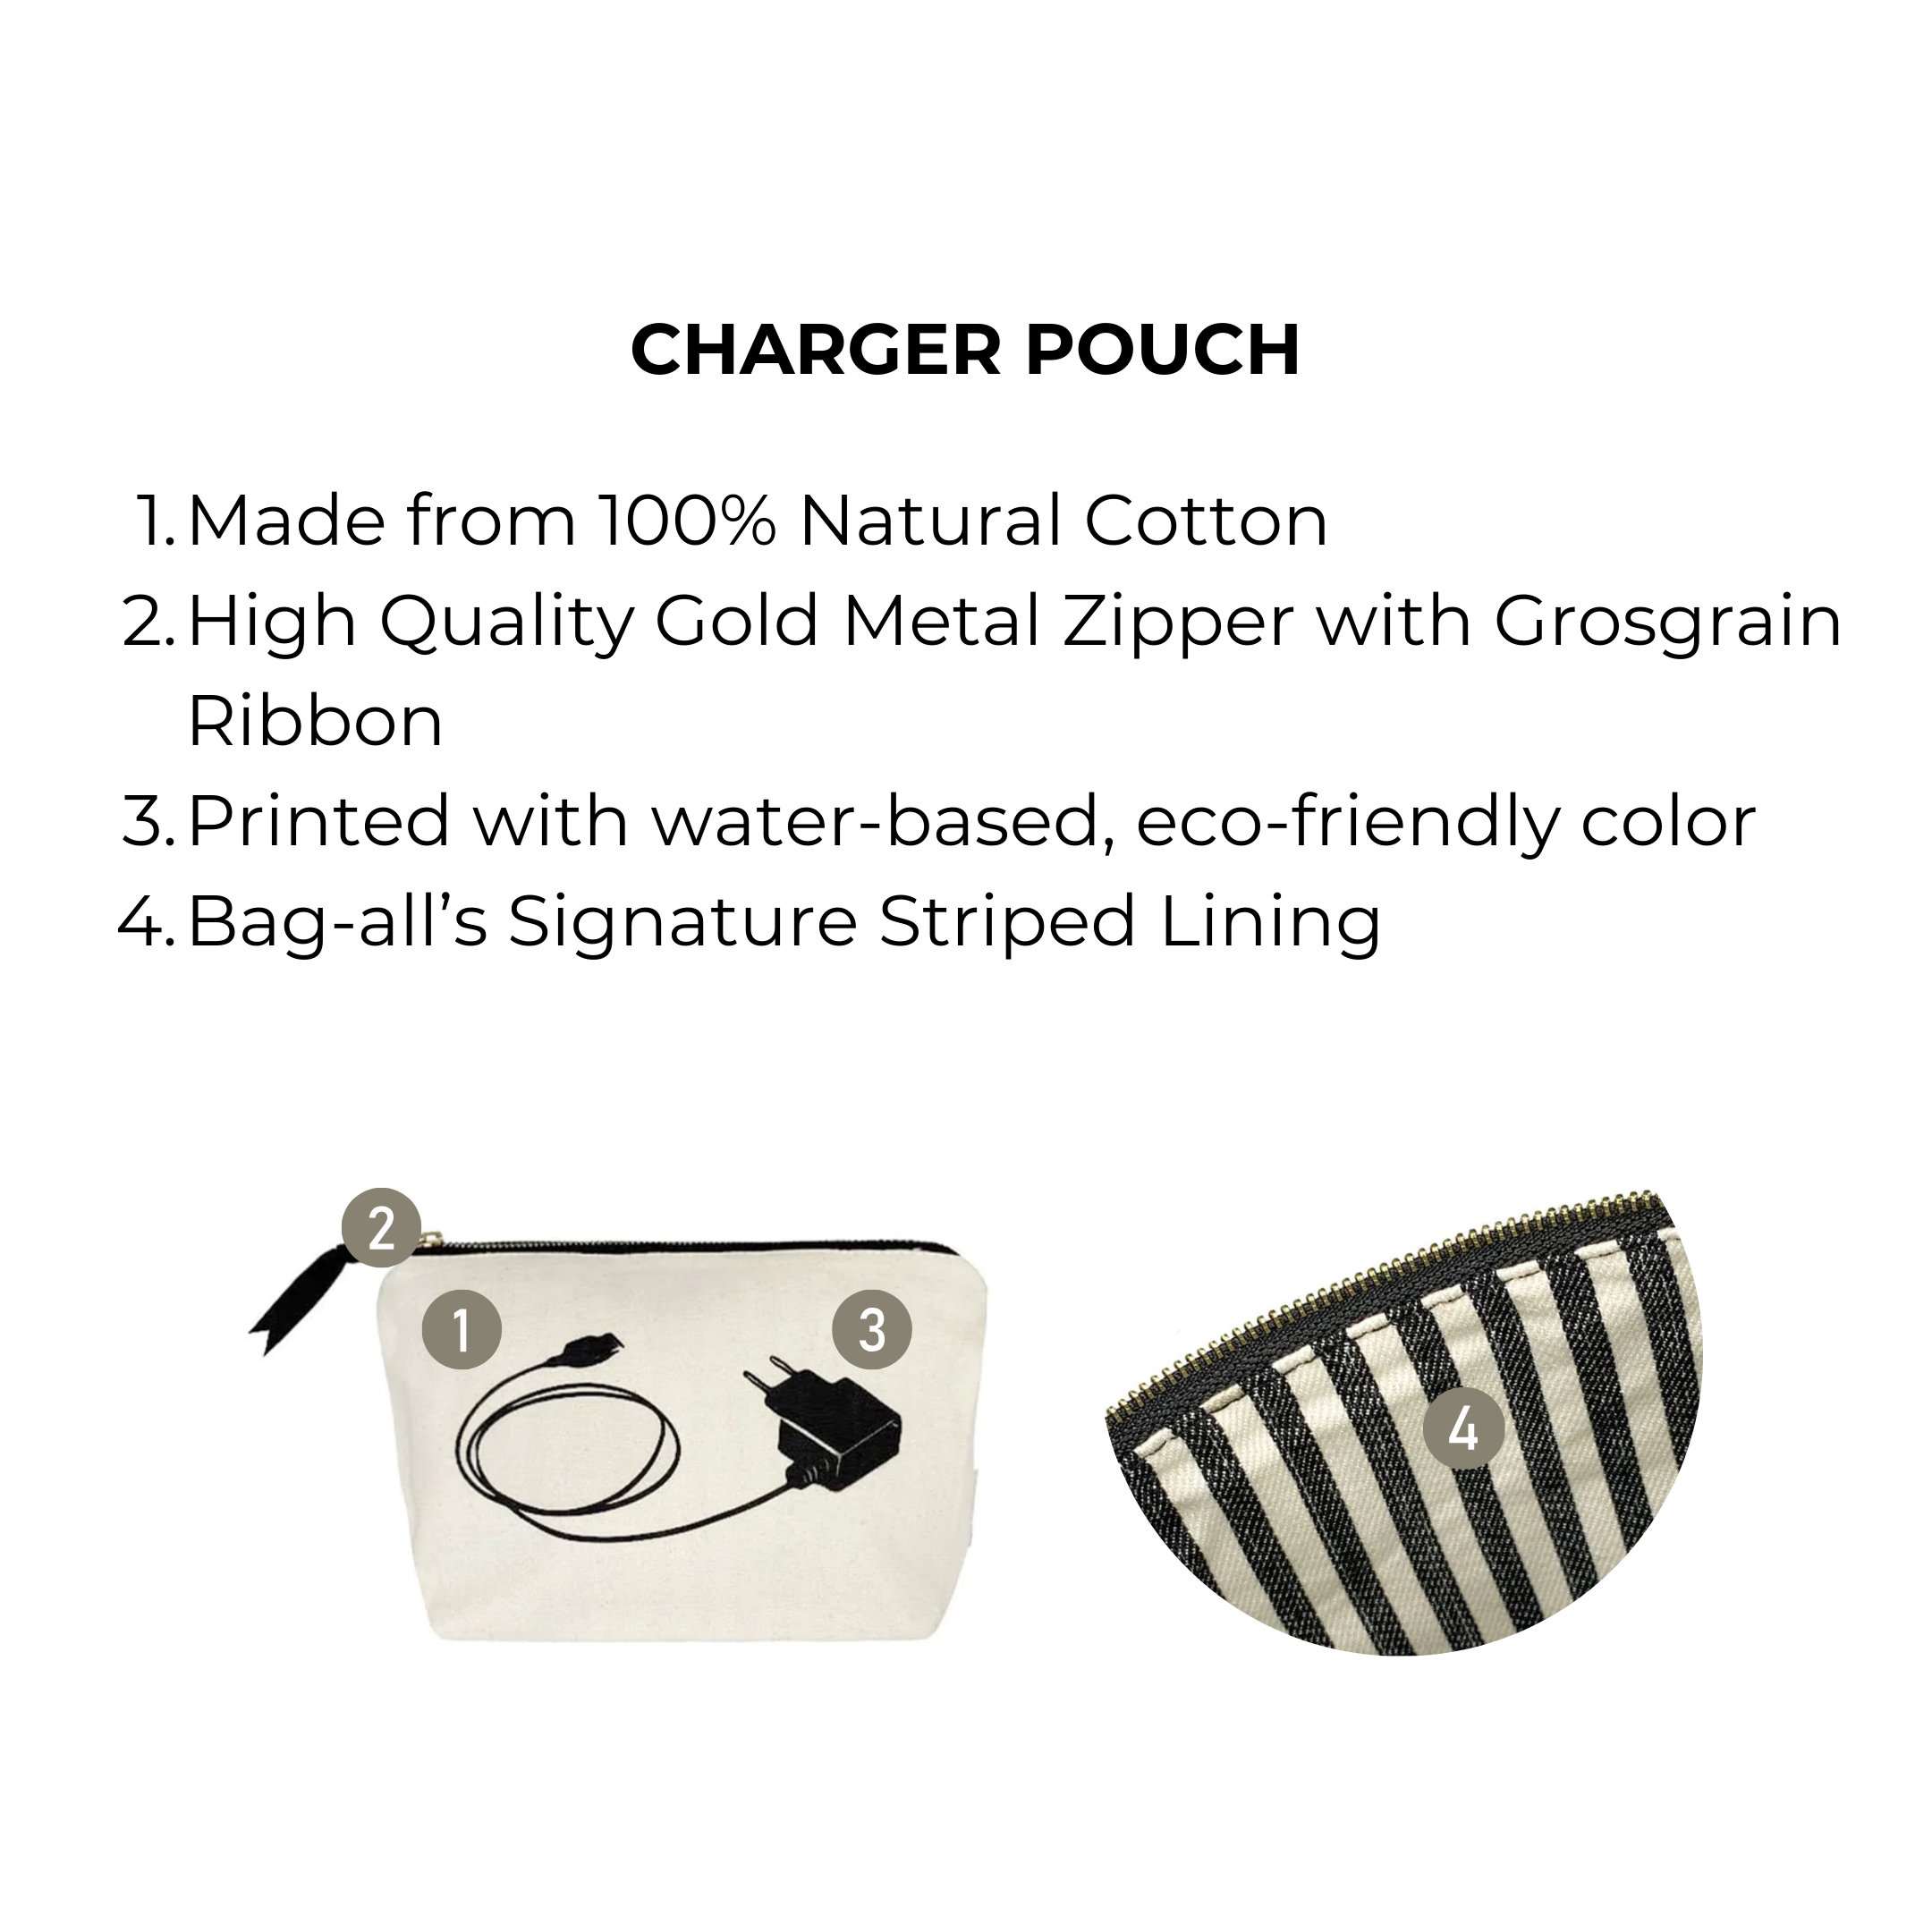 Charger Pouch, Cream | Bag-all